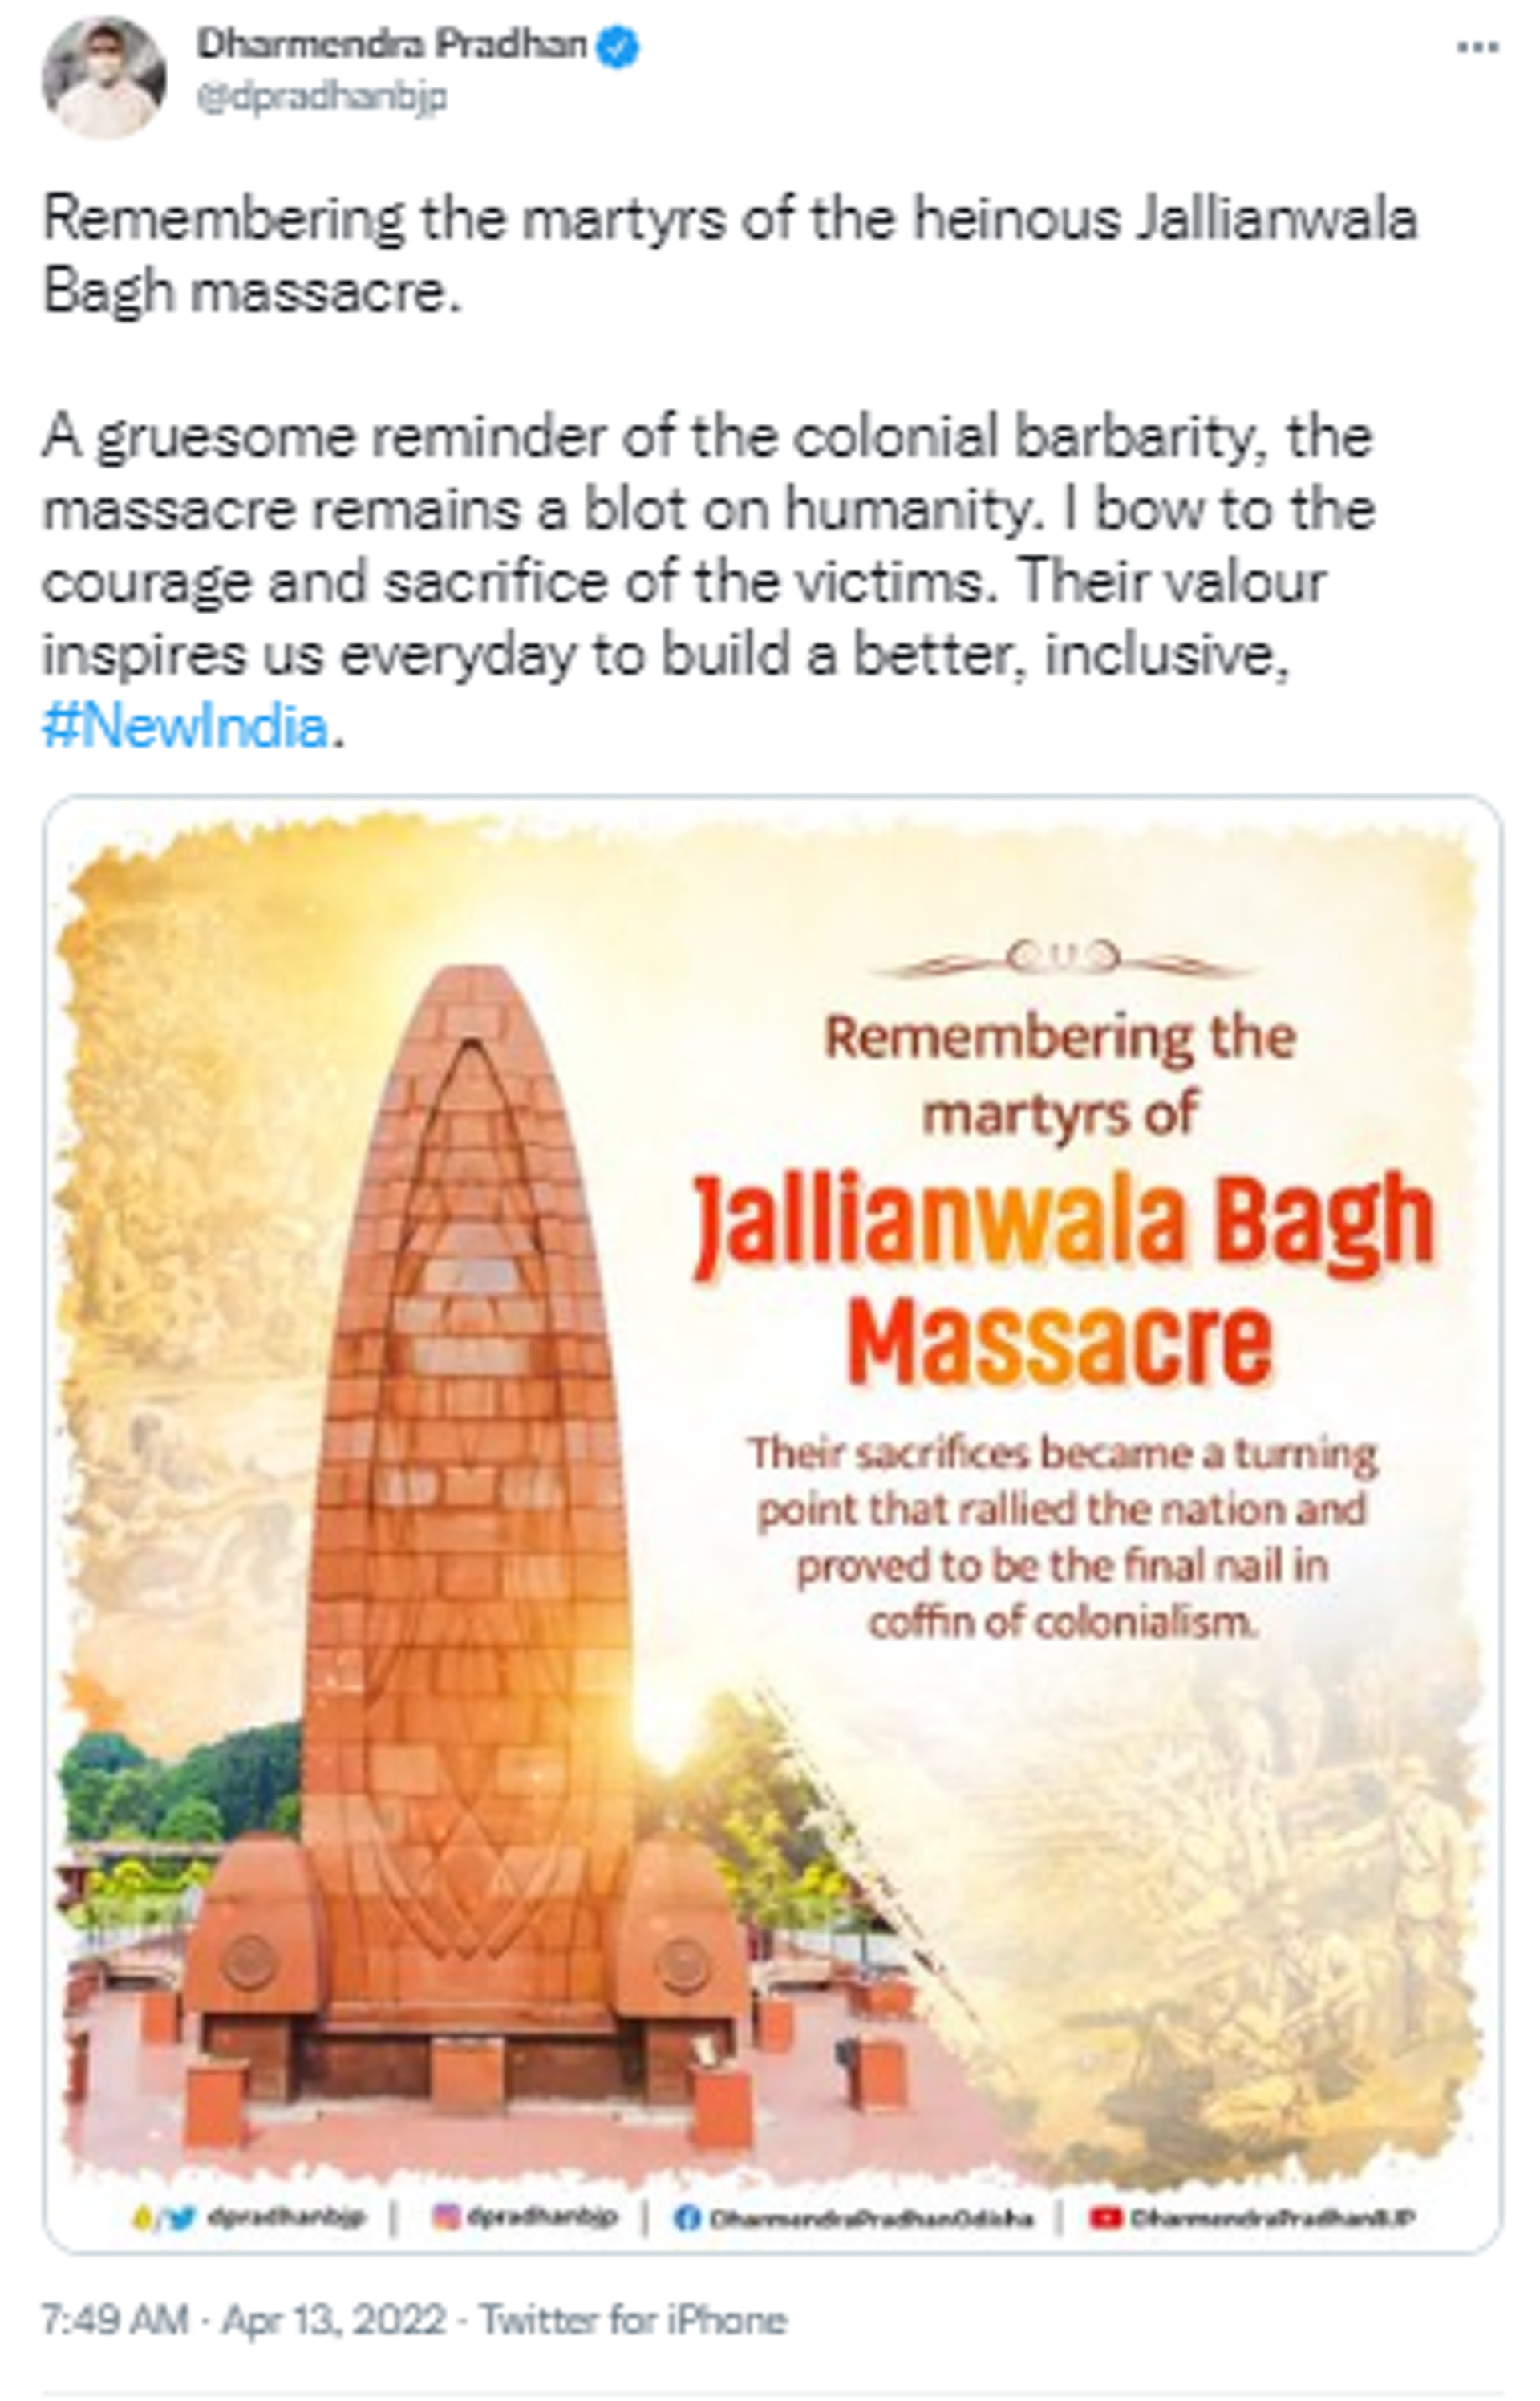 Federal Minister Dharmendra Pradhan pays tribute to the victims of the Jallianwala Bagh Massacre - Sputnik International, 1920, 13.04.2022